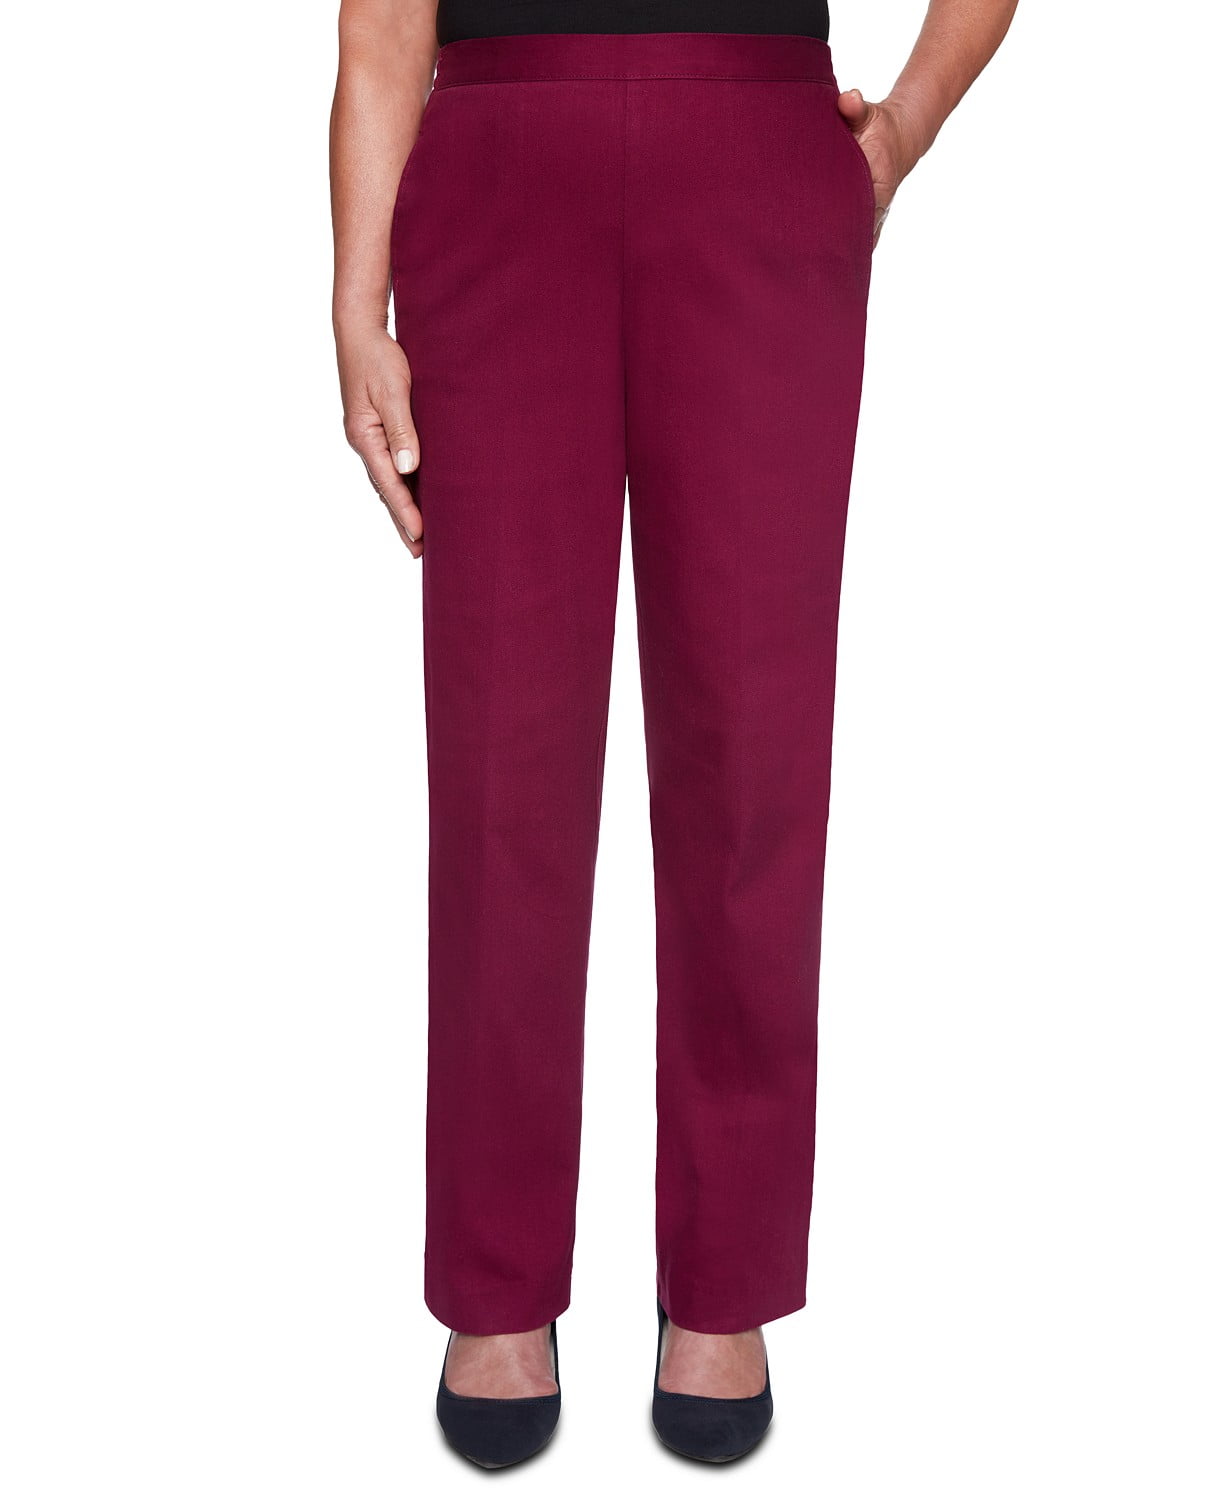 Alfred Dunner Women's Petite Autumn Harvest Colored Denim Pants Red ...